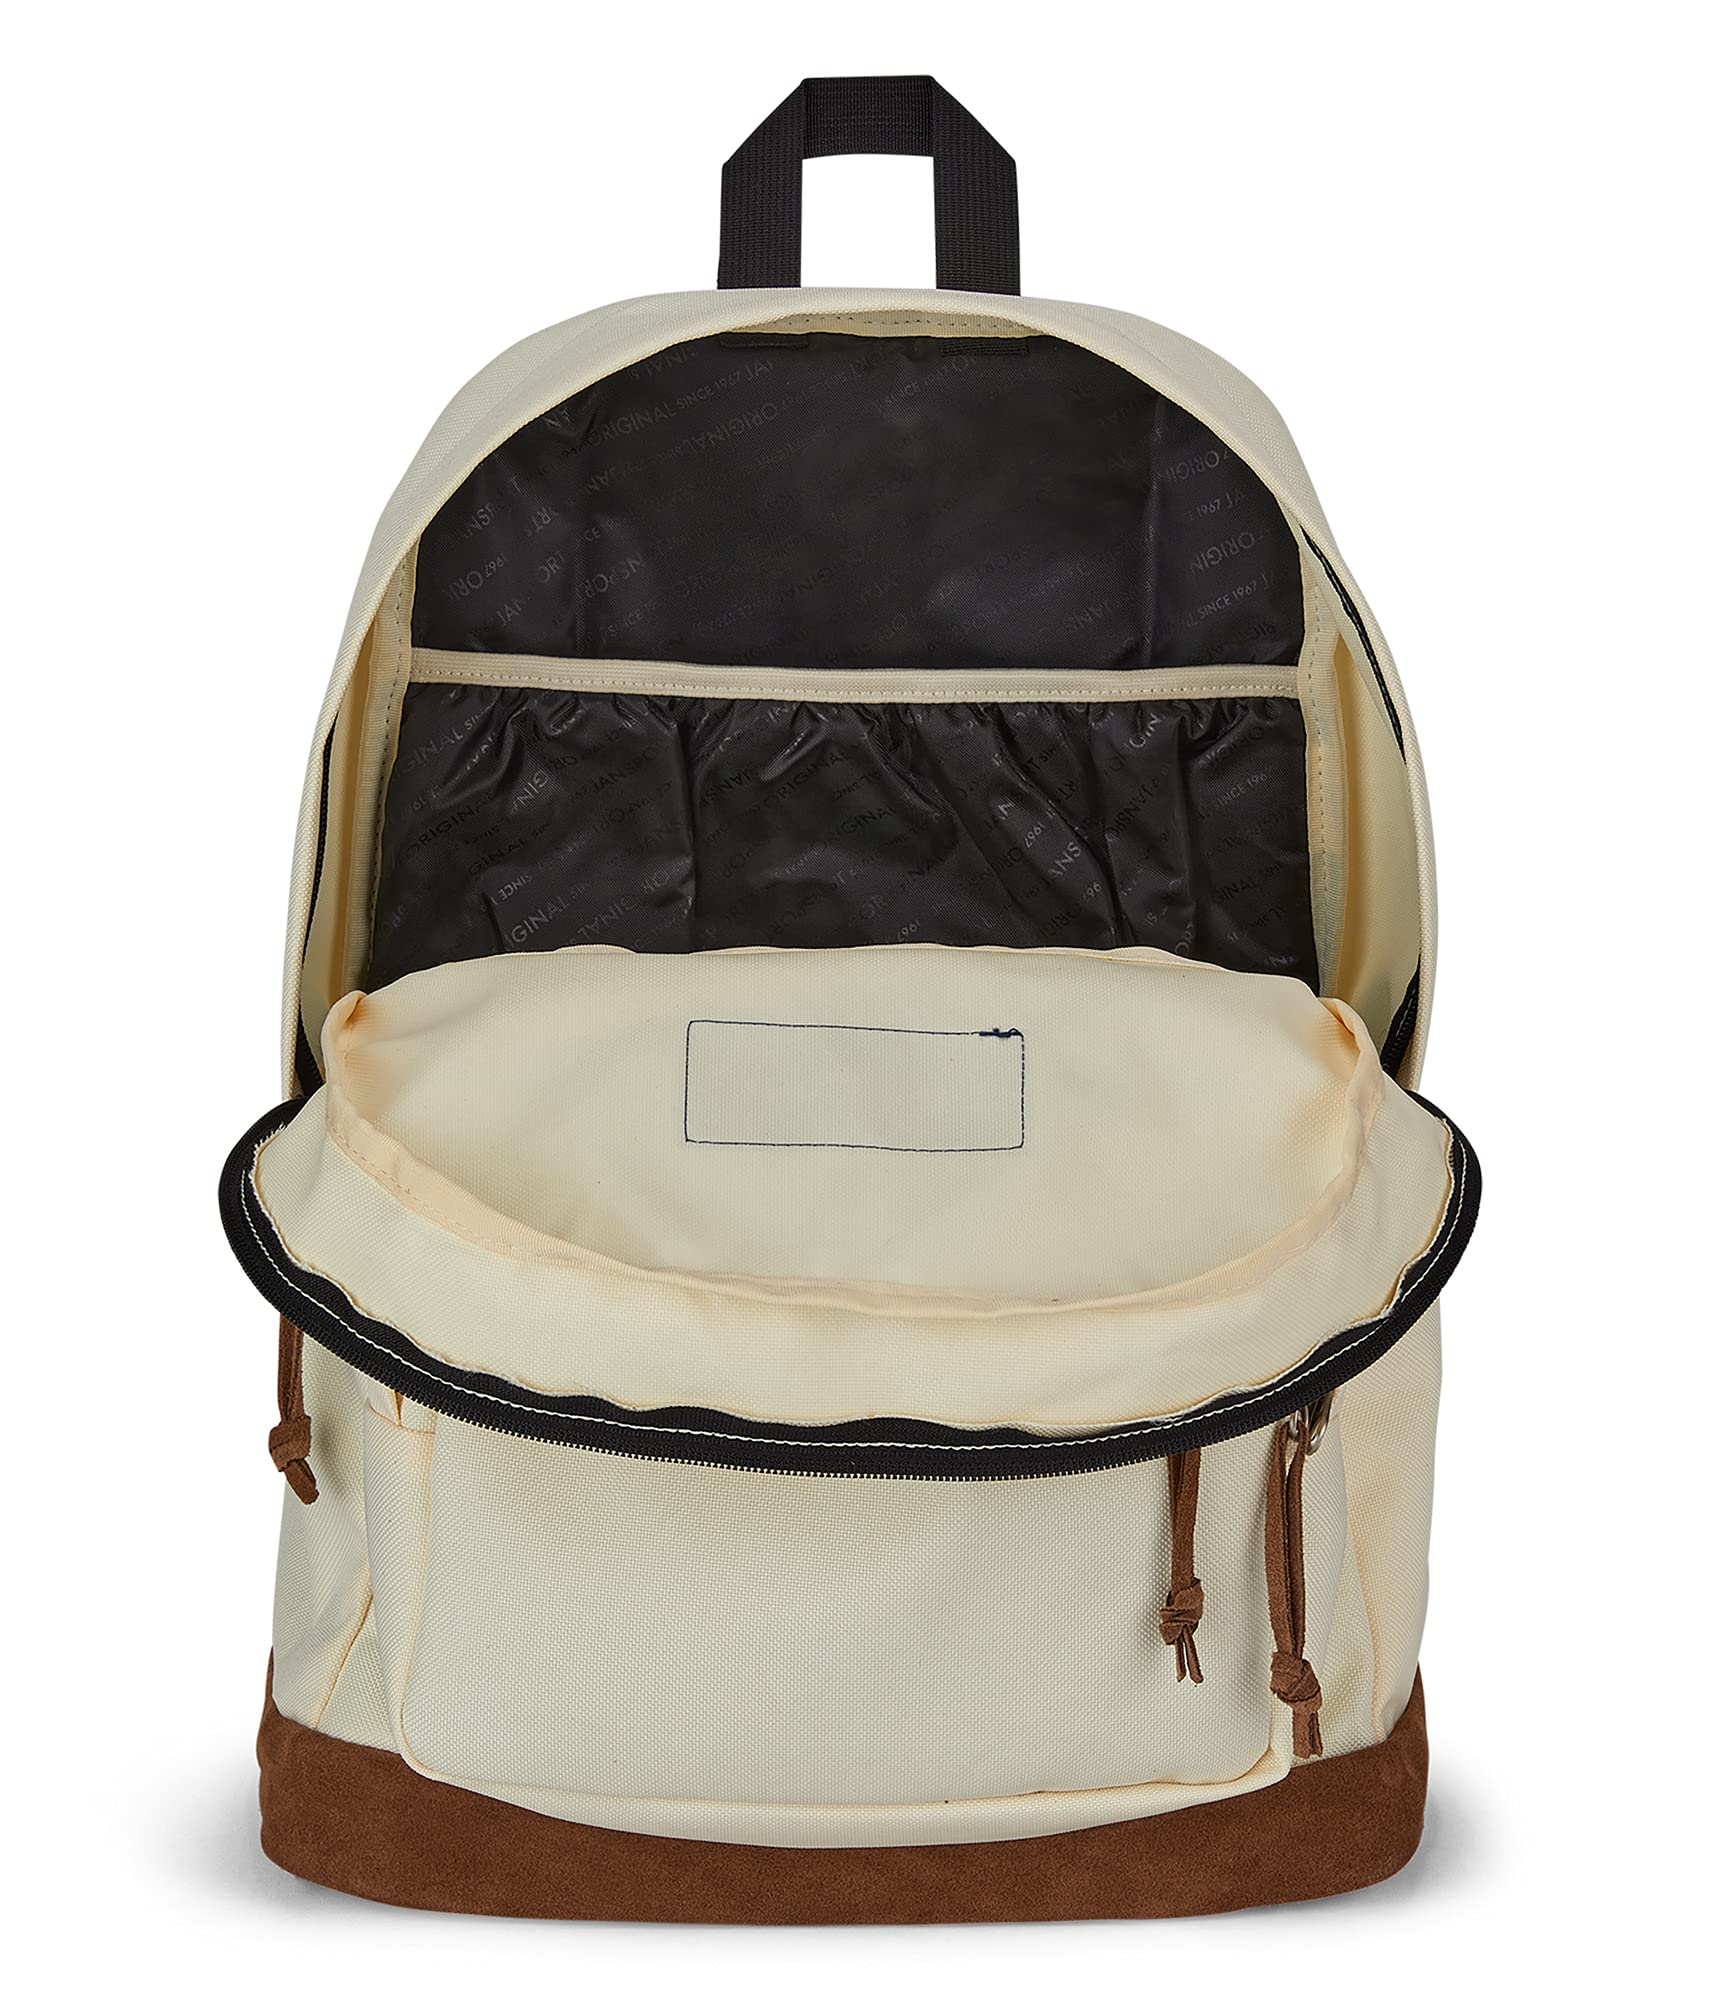 JanSport Right Pack Backpack - Travel, Work, or Laptop Bookbag with Leather Bottom, Coconut